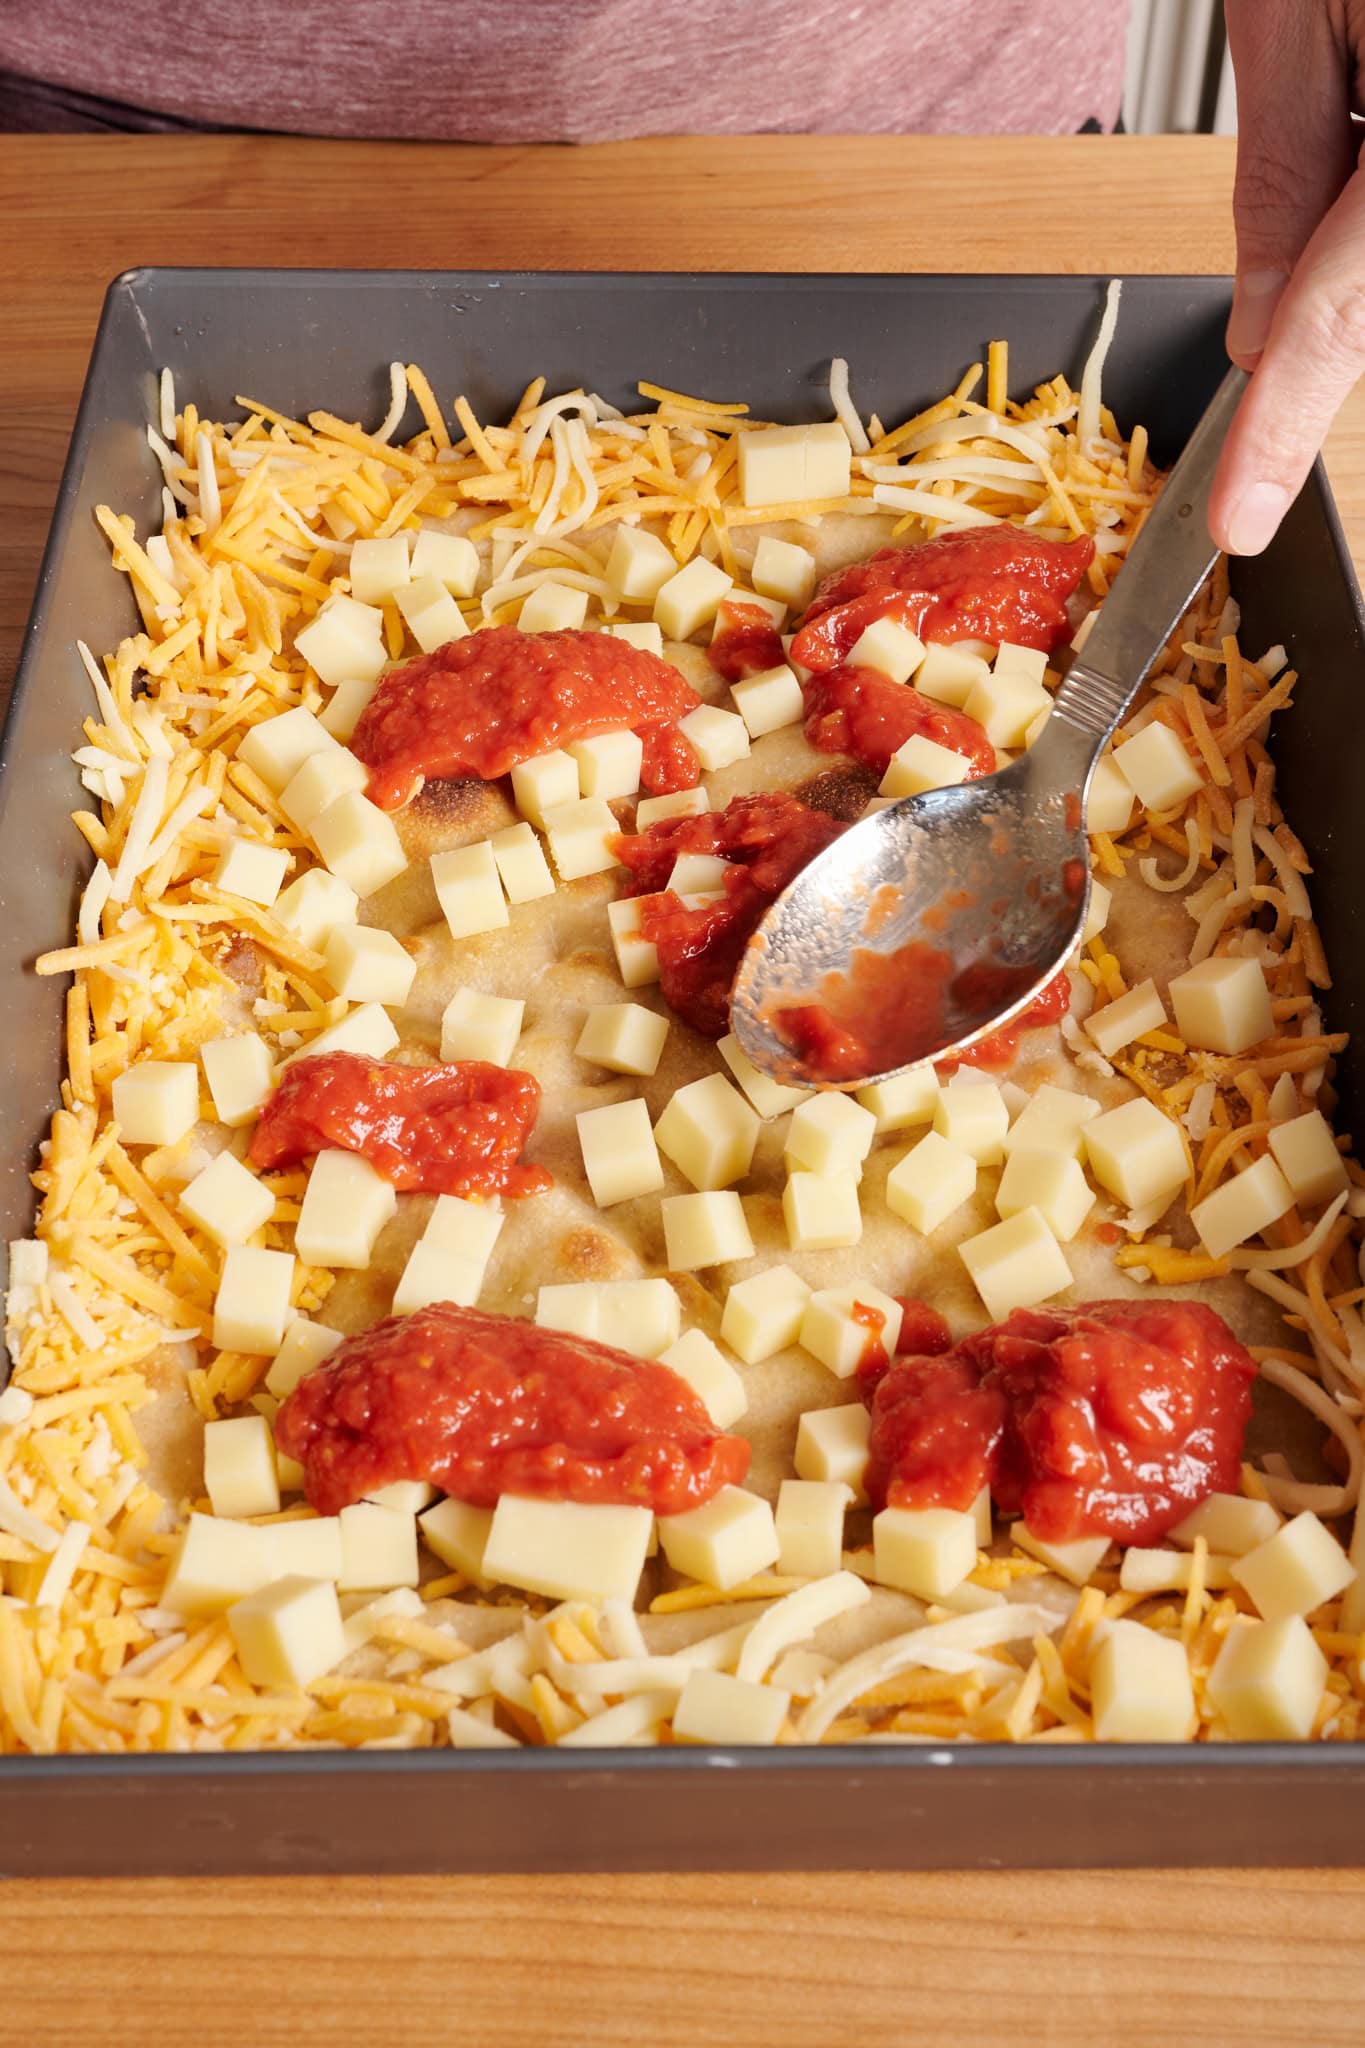 Spread the tomato sauce evenly over the cheese.